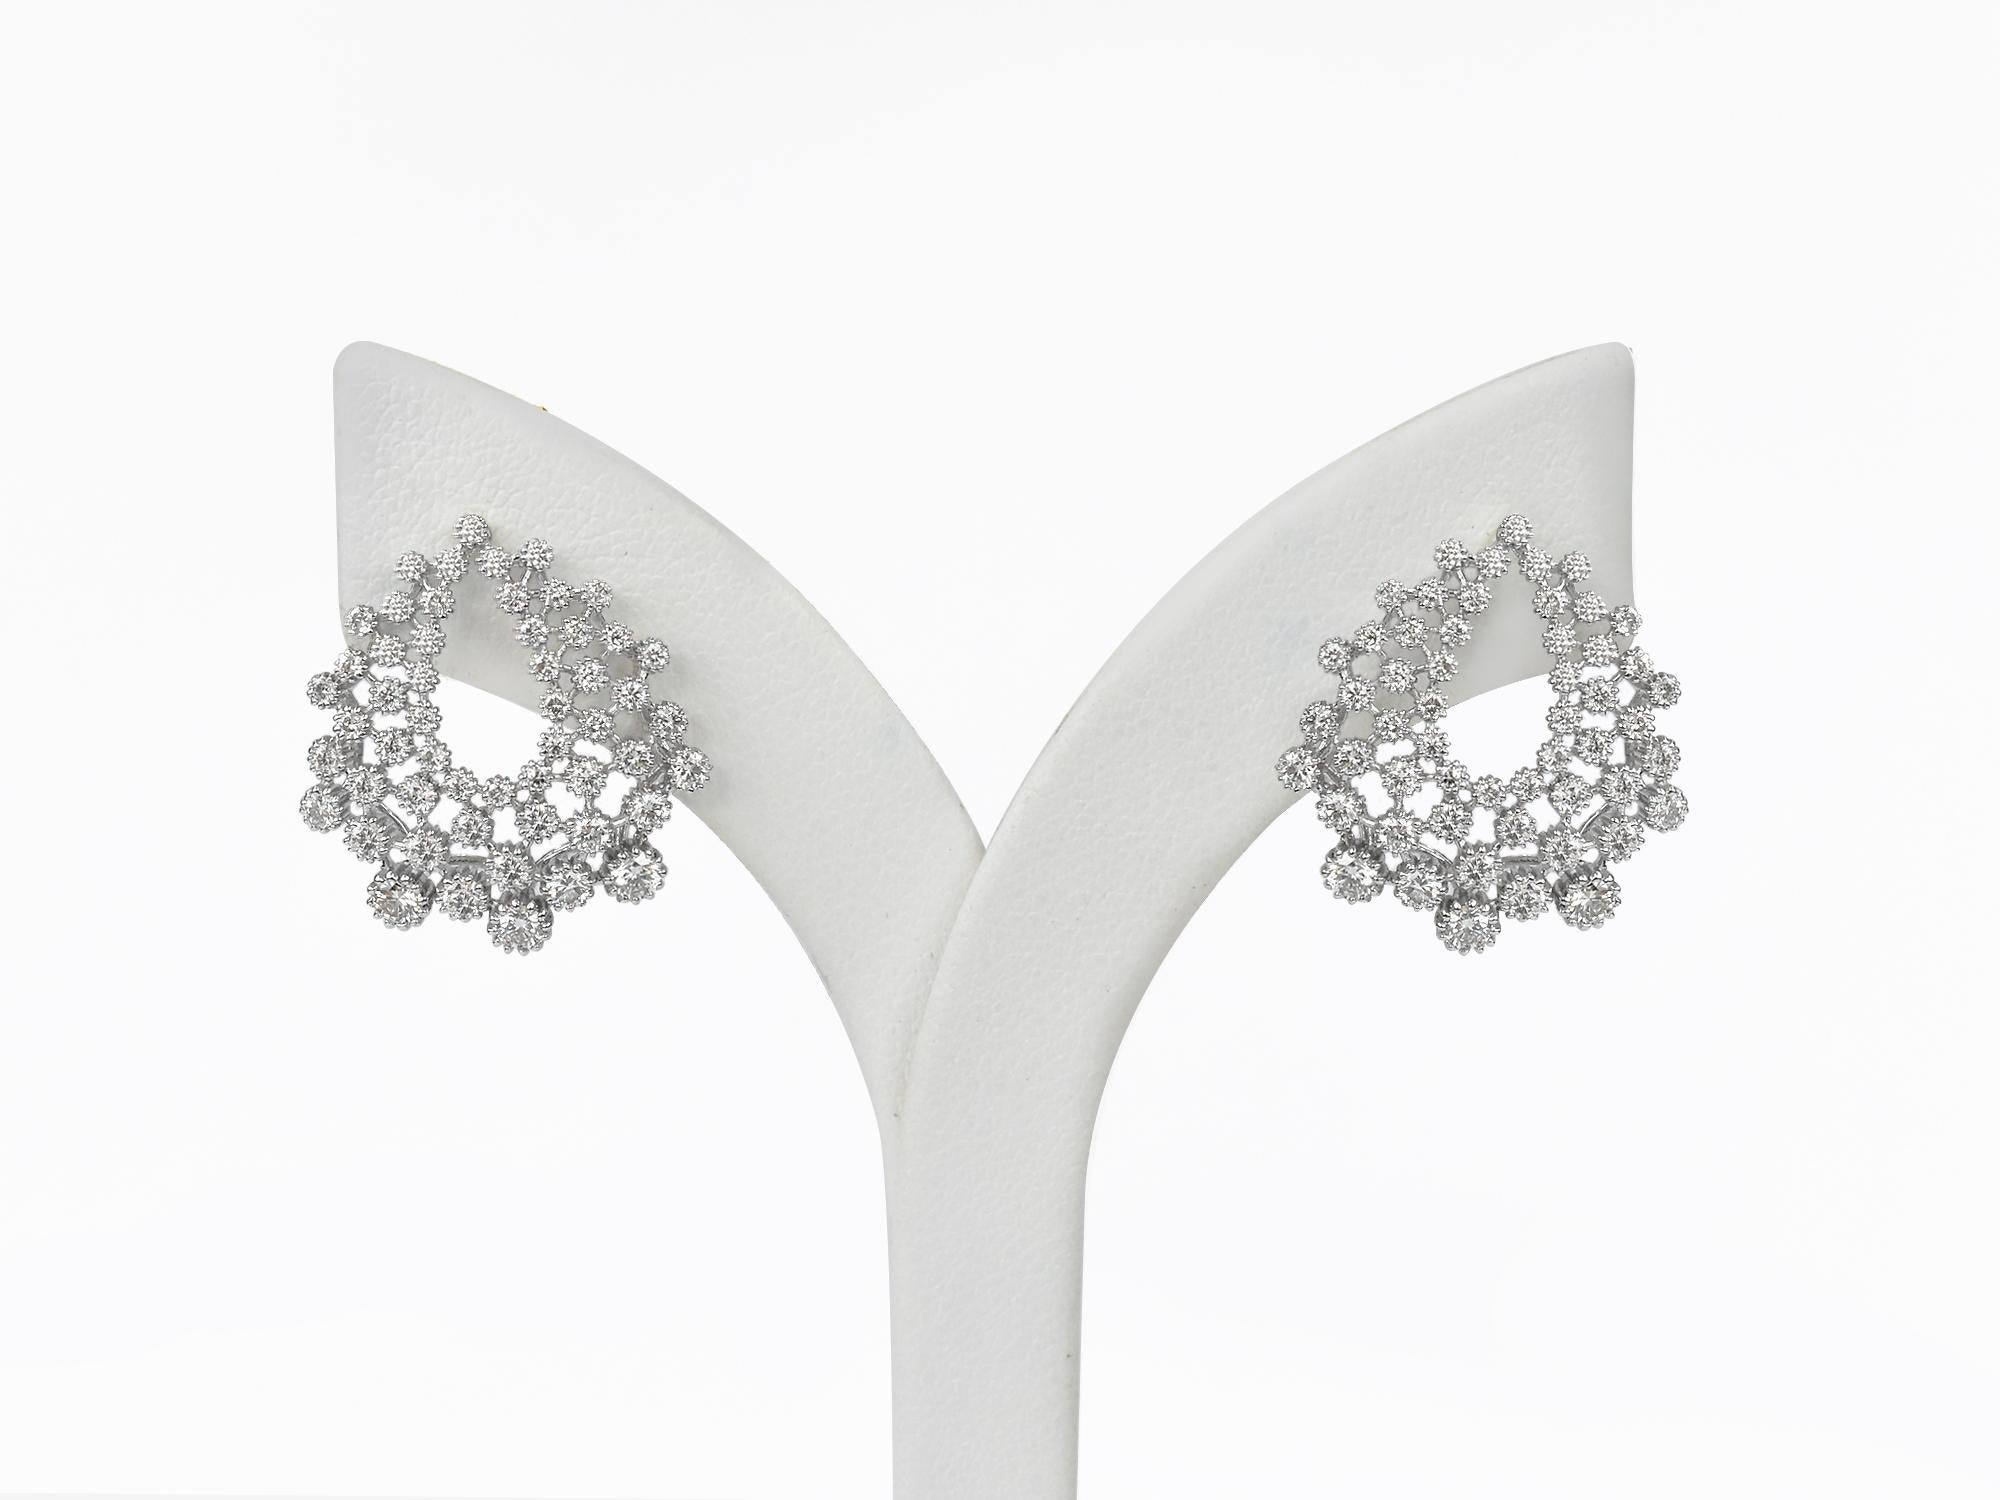 18Karat Gold Earring White Gold Diamond Pave Fashion Earring
     A fashion Art Nouveau earring is fully paved with brilliant-cut diamonds set in stunning 18K white gold. Sculptural arrangements of diamonds designed to enchant and enthrall by Oshi